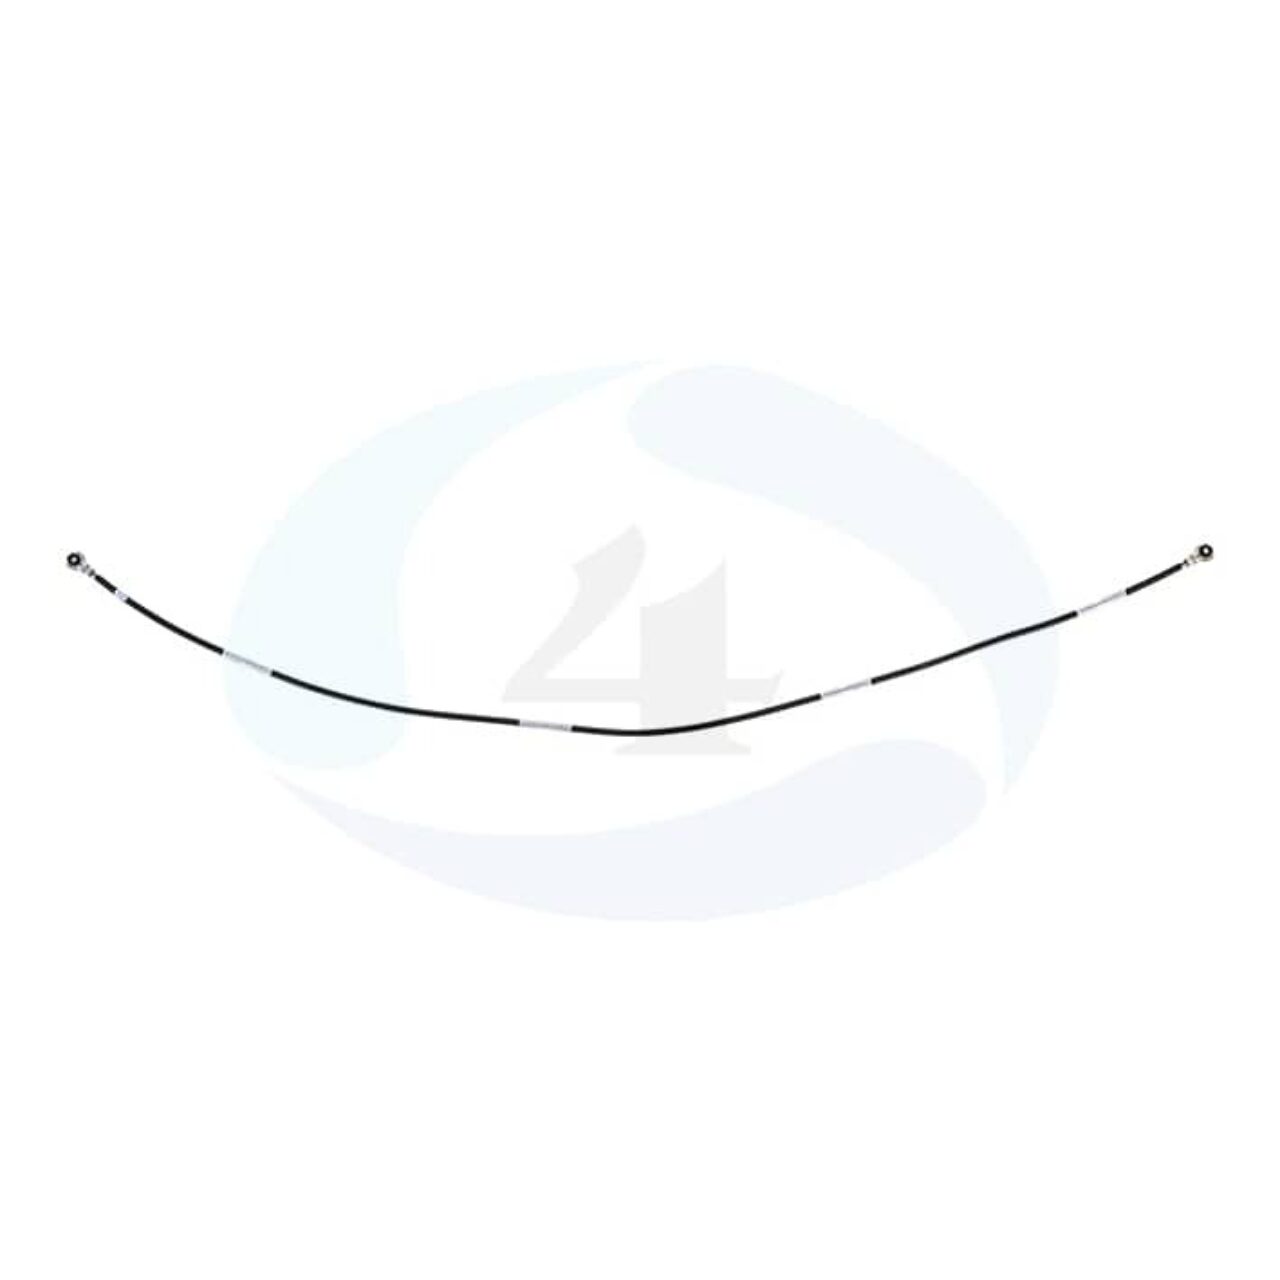 Antenna Cable For Nokia 7 TA 1041